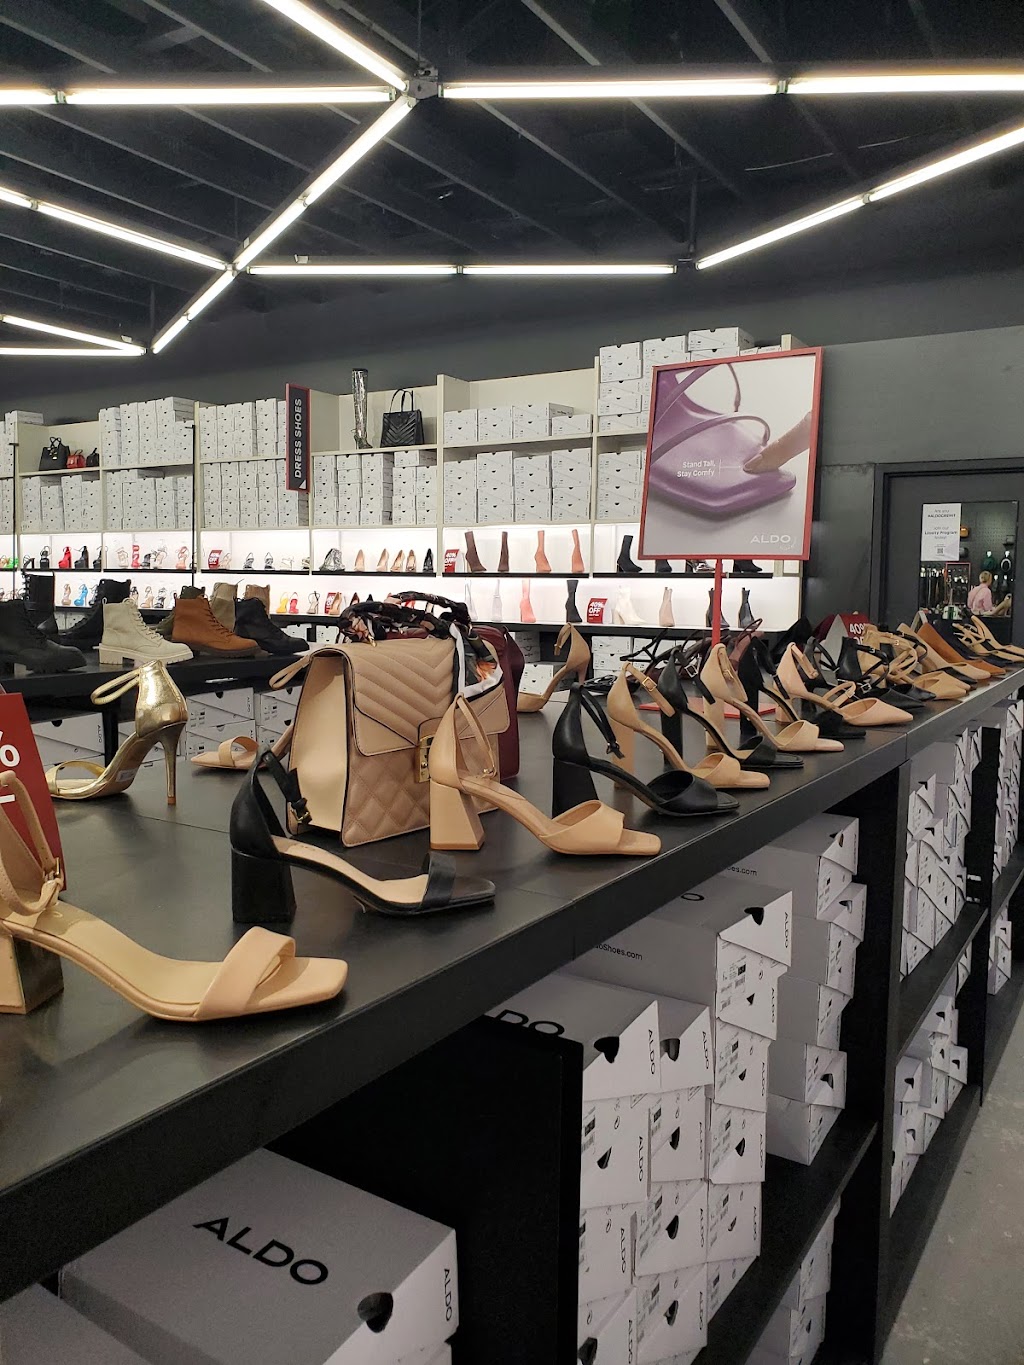 ALDO Outlet | 657 Racetrack Ln #0657A, Woodbury, NY 10917 | Phone: (845) 928-5111